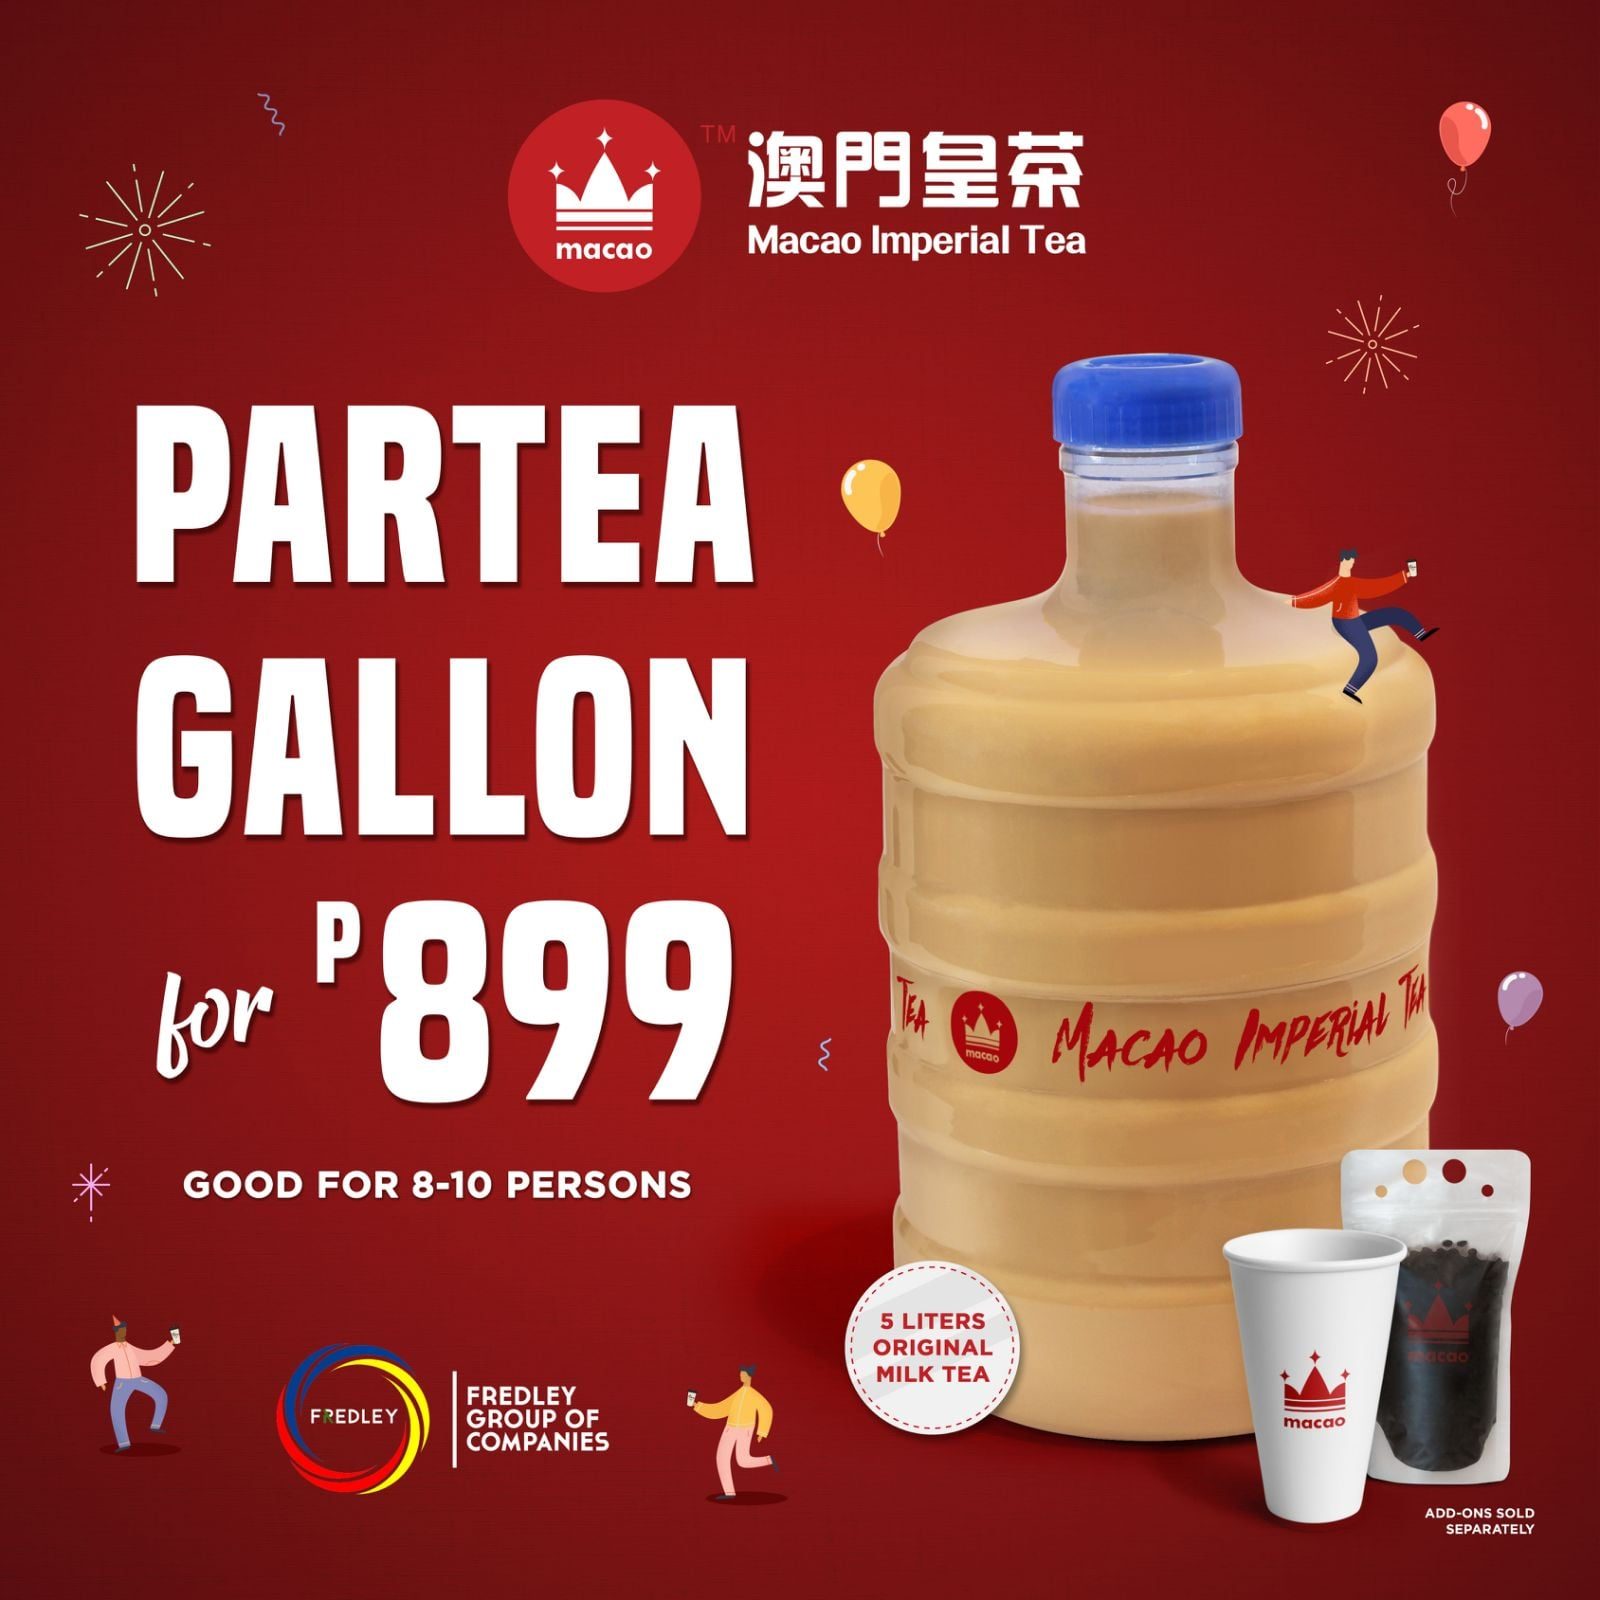 You can now get a gallon of Macao Imperial Tea